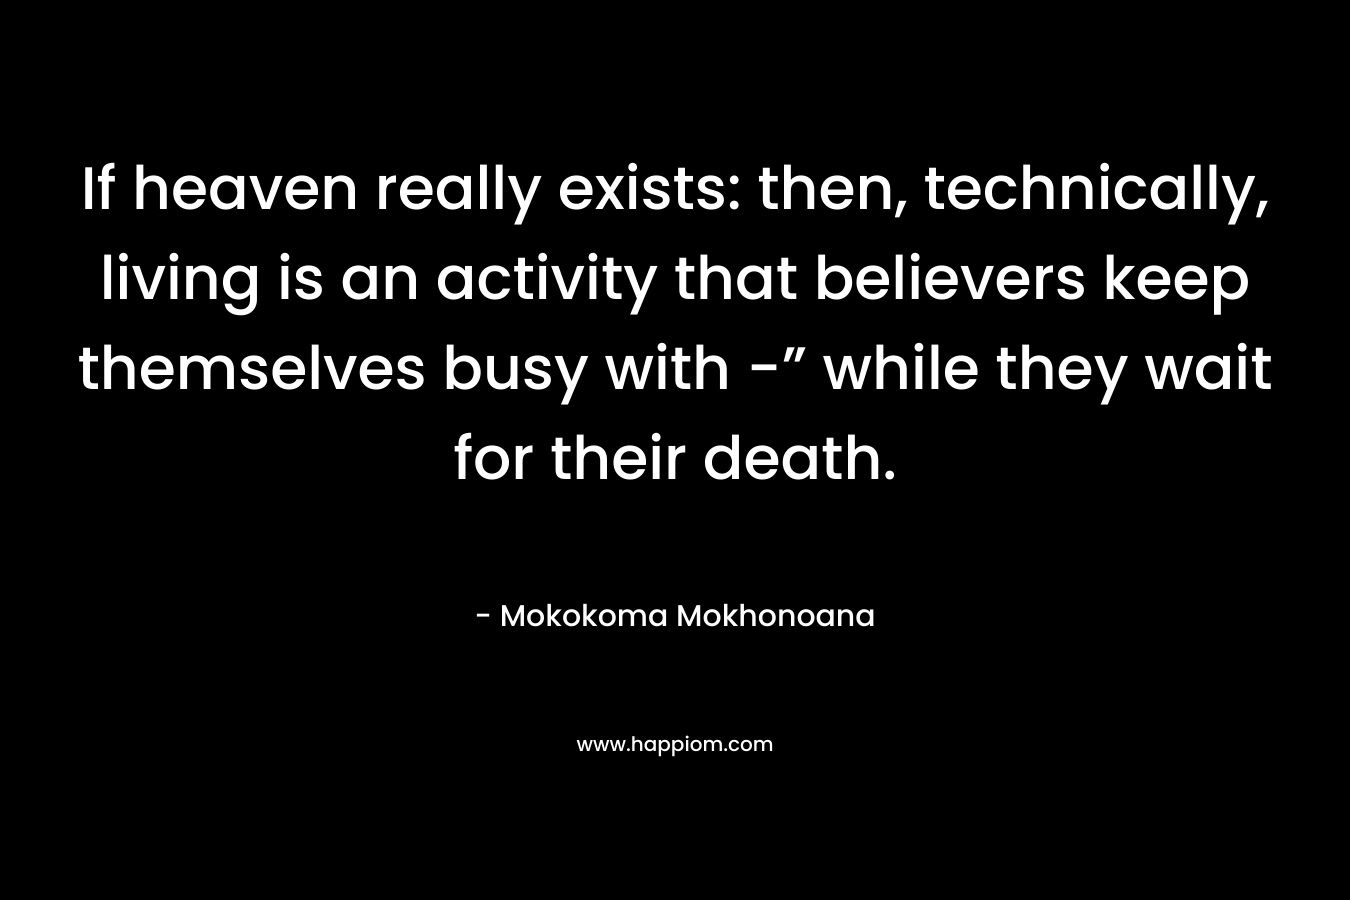 If heaven really exists: then, technically, living is an activity that believers keep themselves busy with -” while they wait for their death.